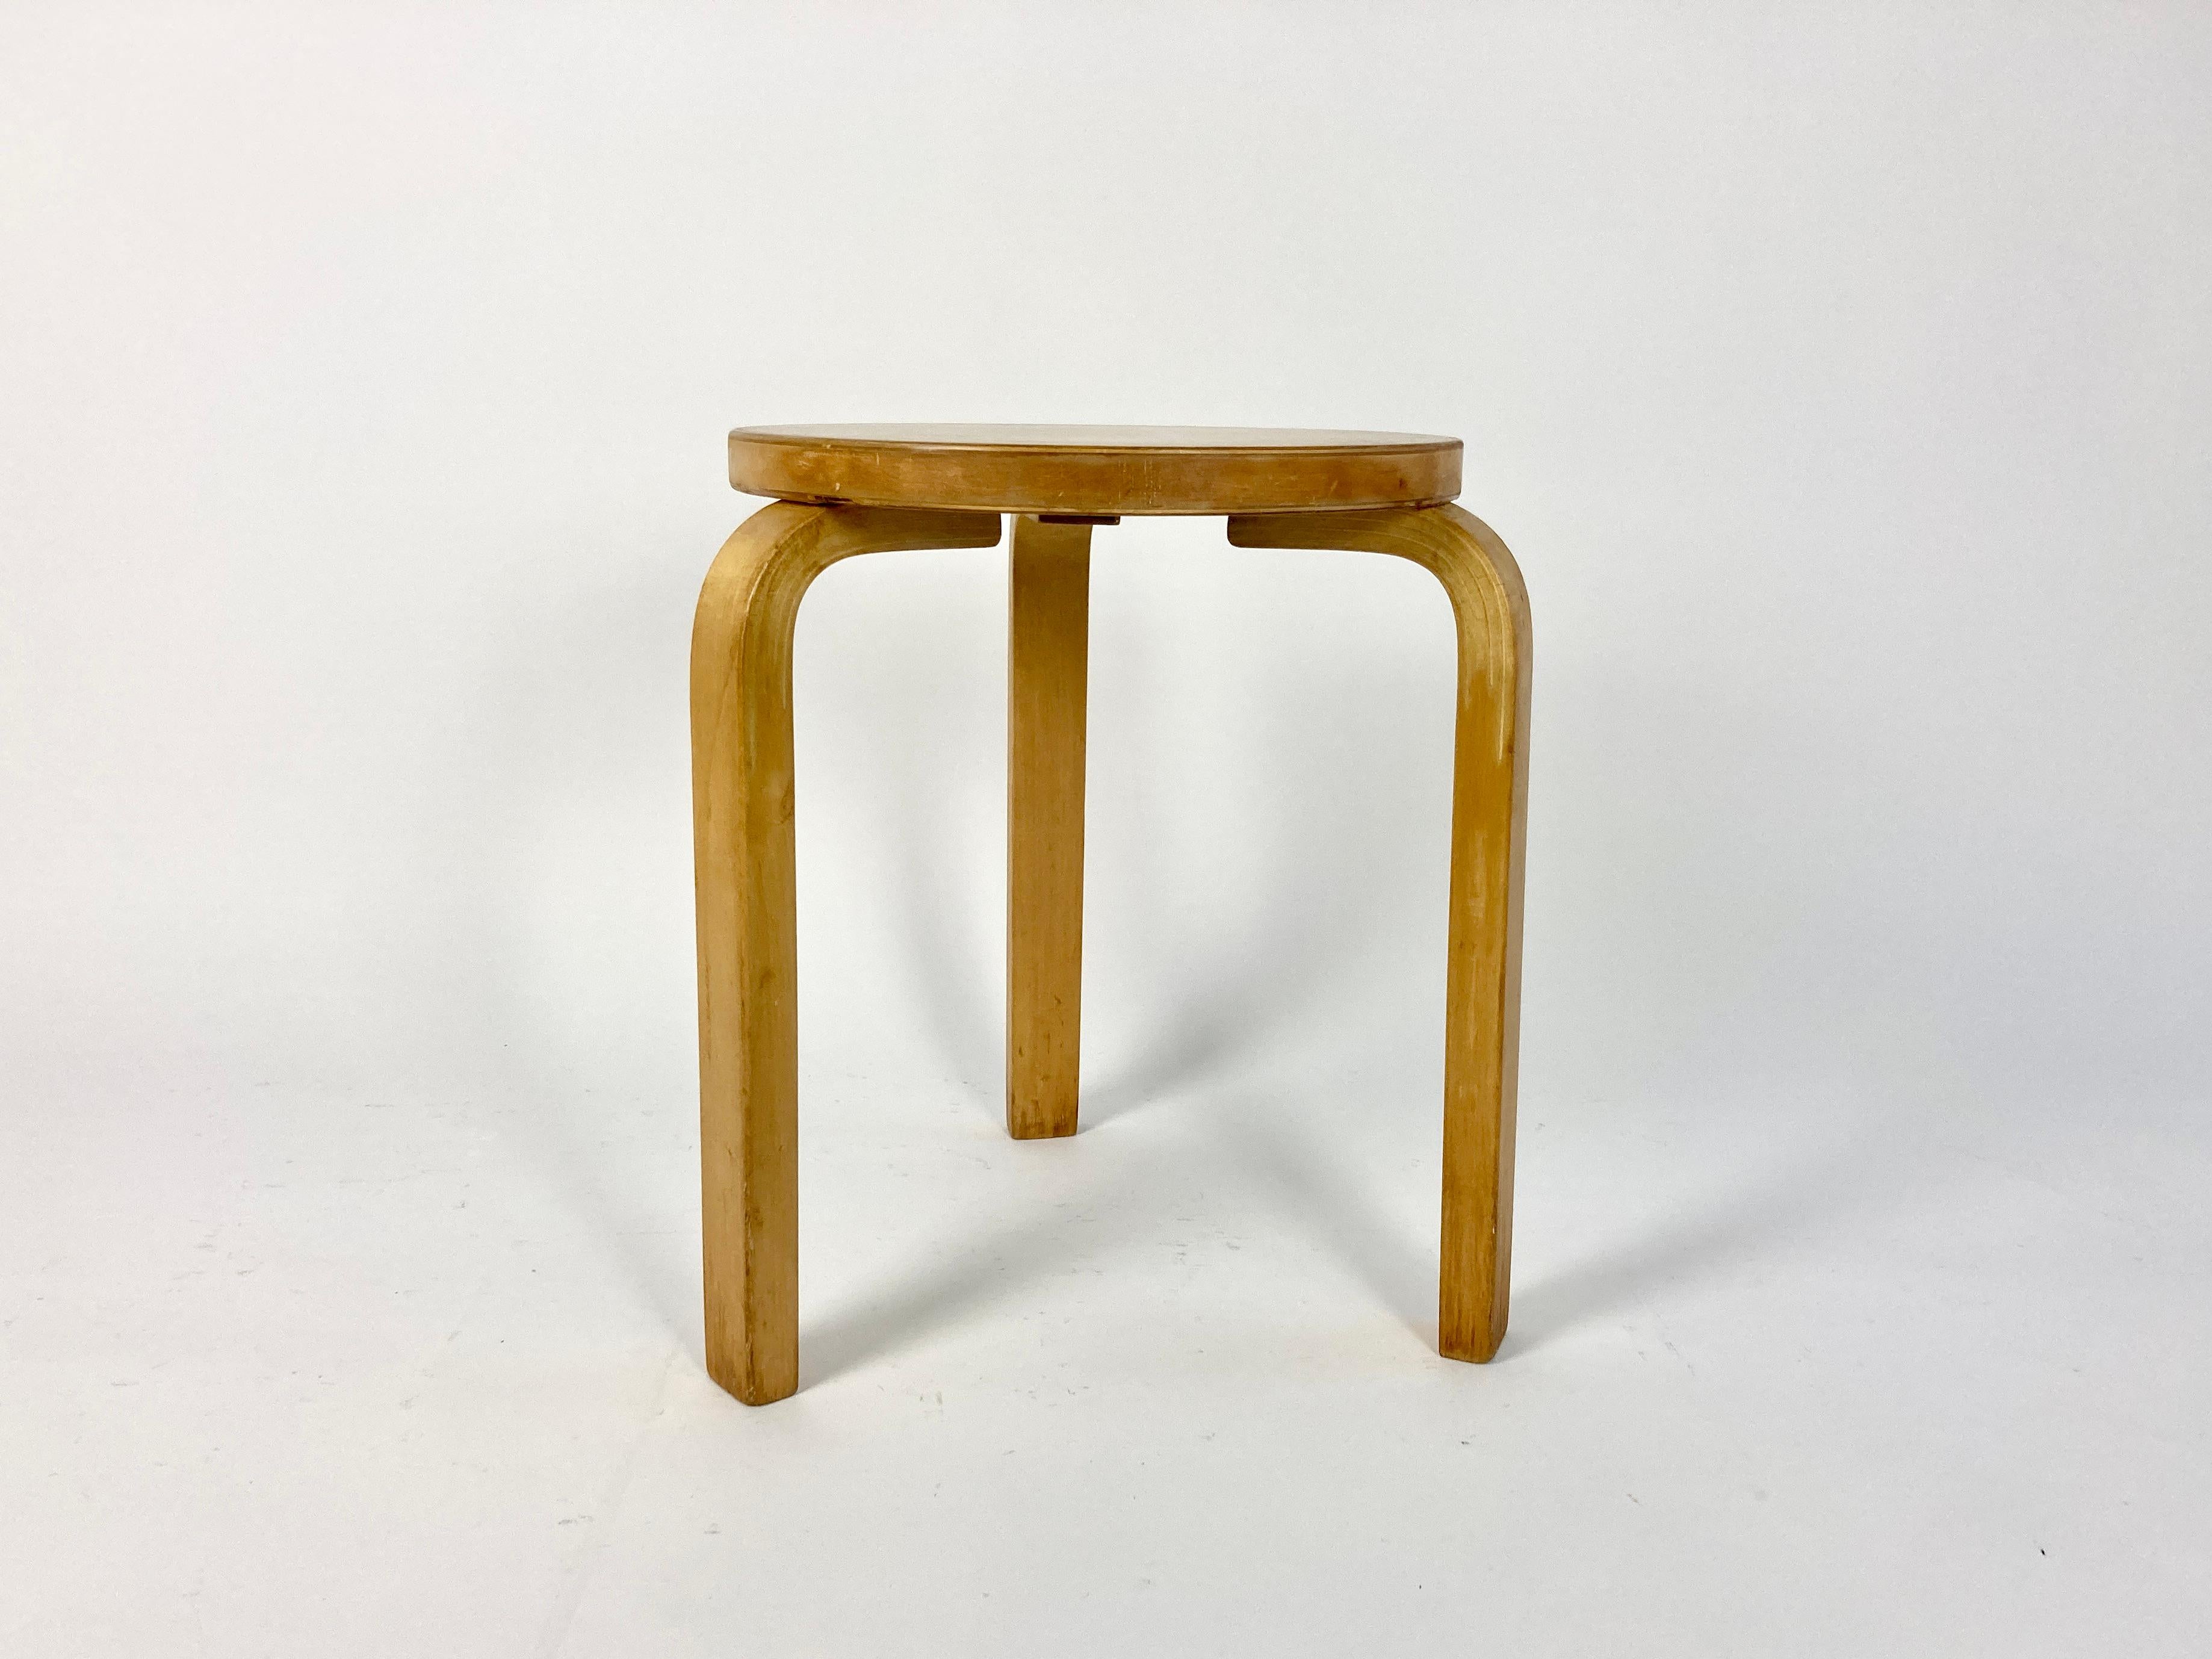 Early production 1930s/40s Model 60 stool designed by Alvar Aalto in 1934, made in Finland and distributed in the UK by Finmar.

Solid bent birch legs, sawn to create the bend. Birch seat with early production finger join to the veneer edge. Ivorine